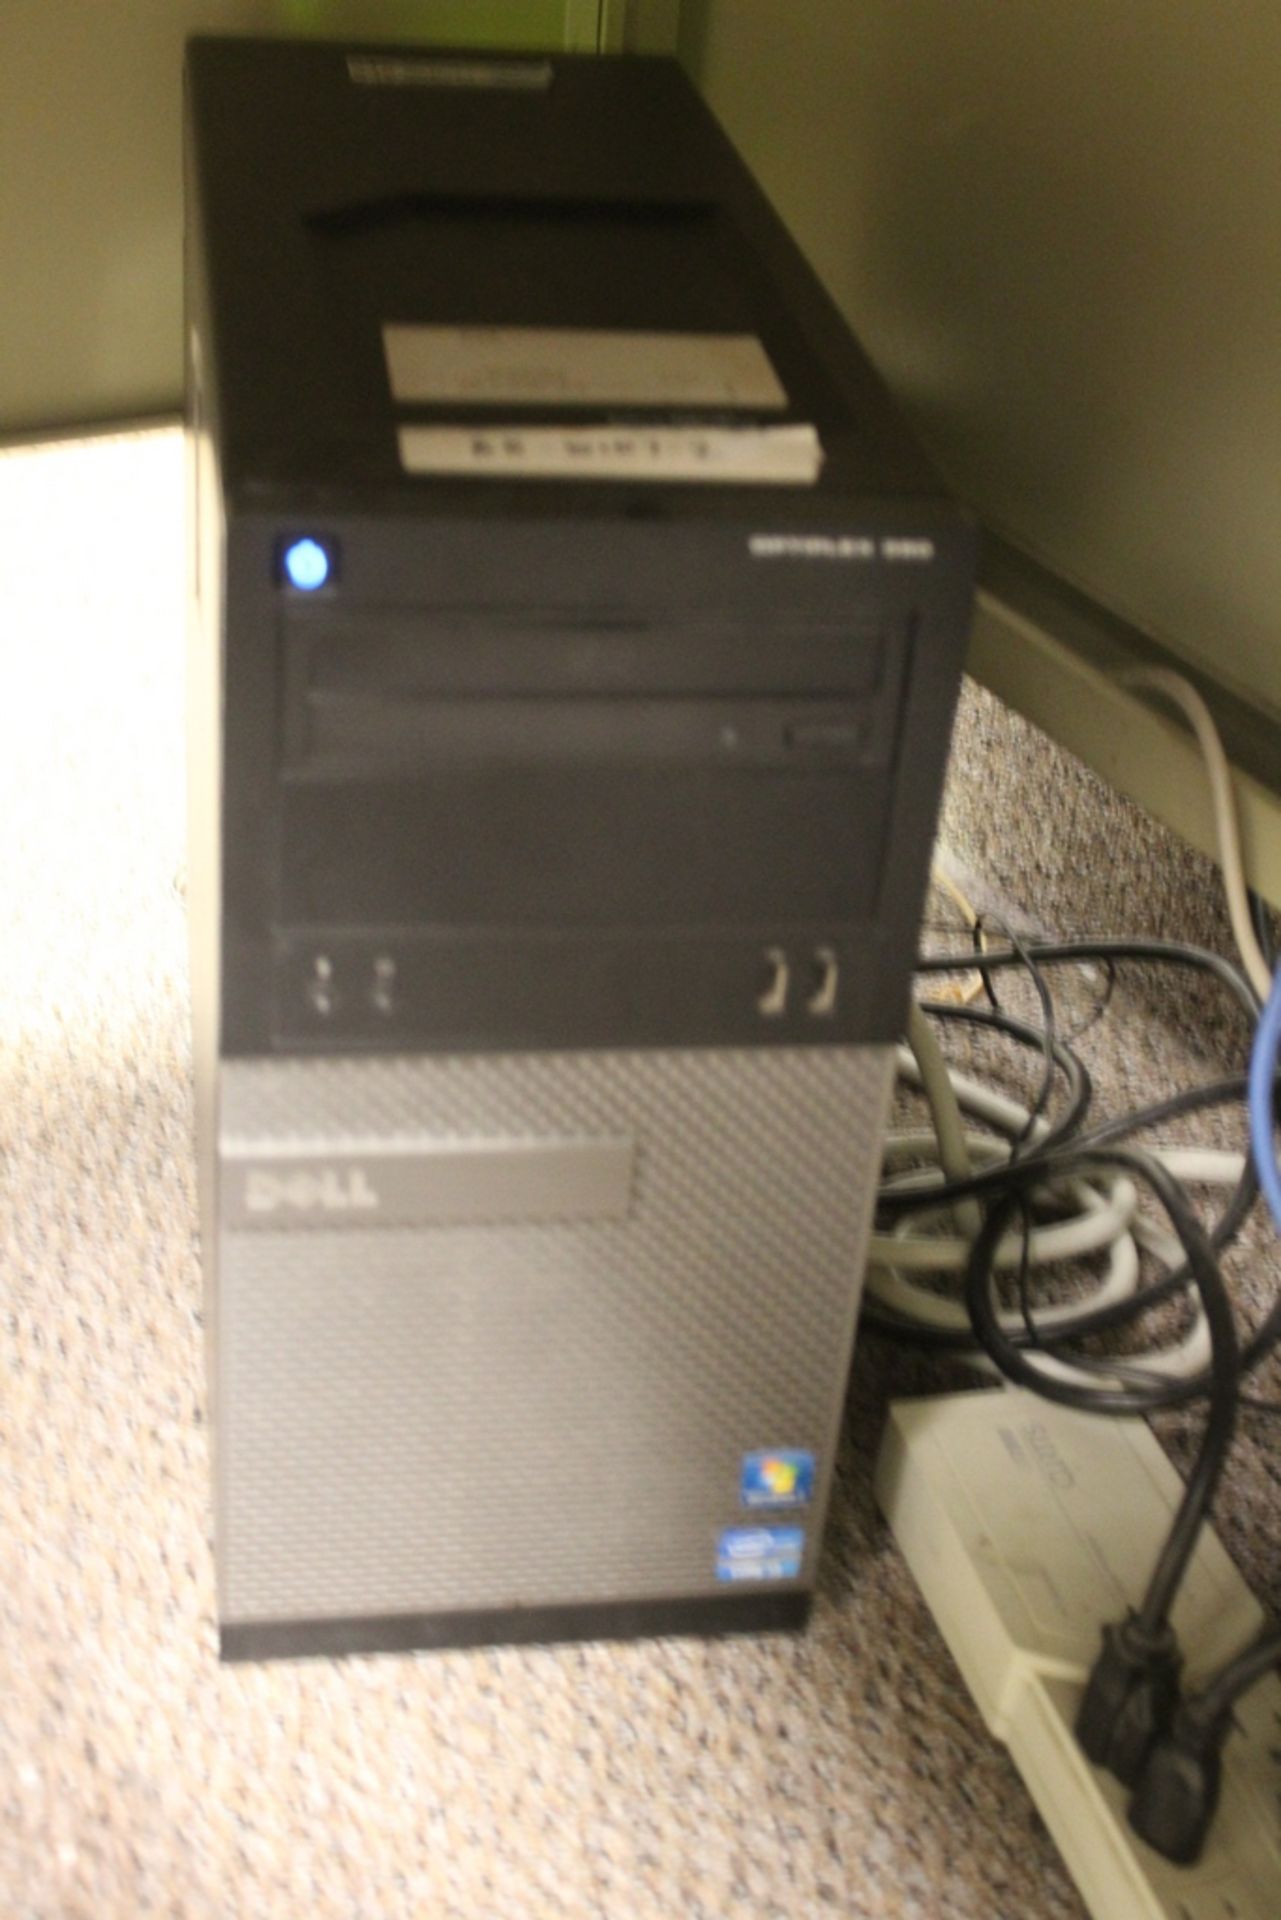 DELL OPTIPLEX 390 DESKTOP COMPUTER WITH DELL 20" FLATSCREEN MONITOR, KEYBOARD AND MOUSE - Image 2 of 2